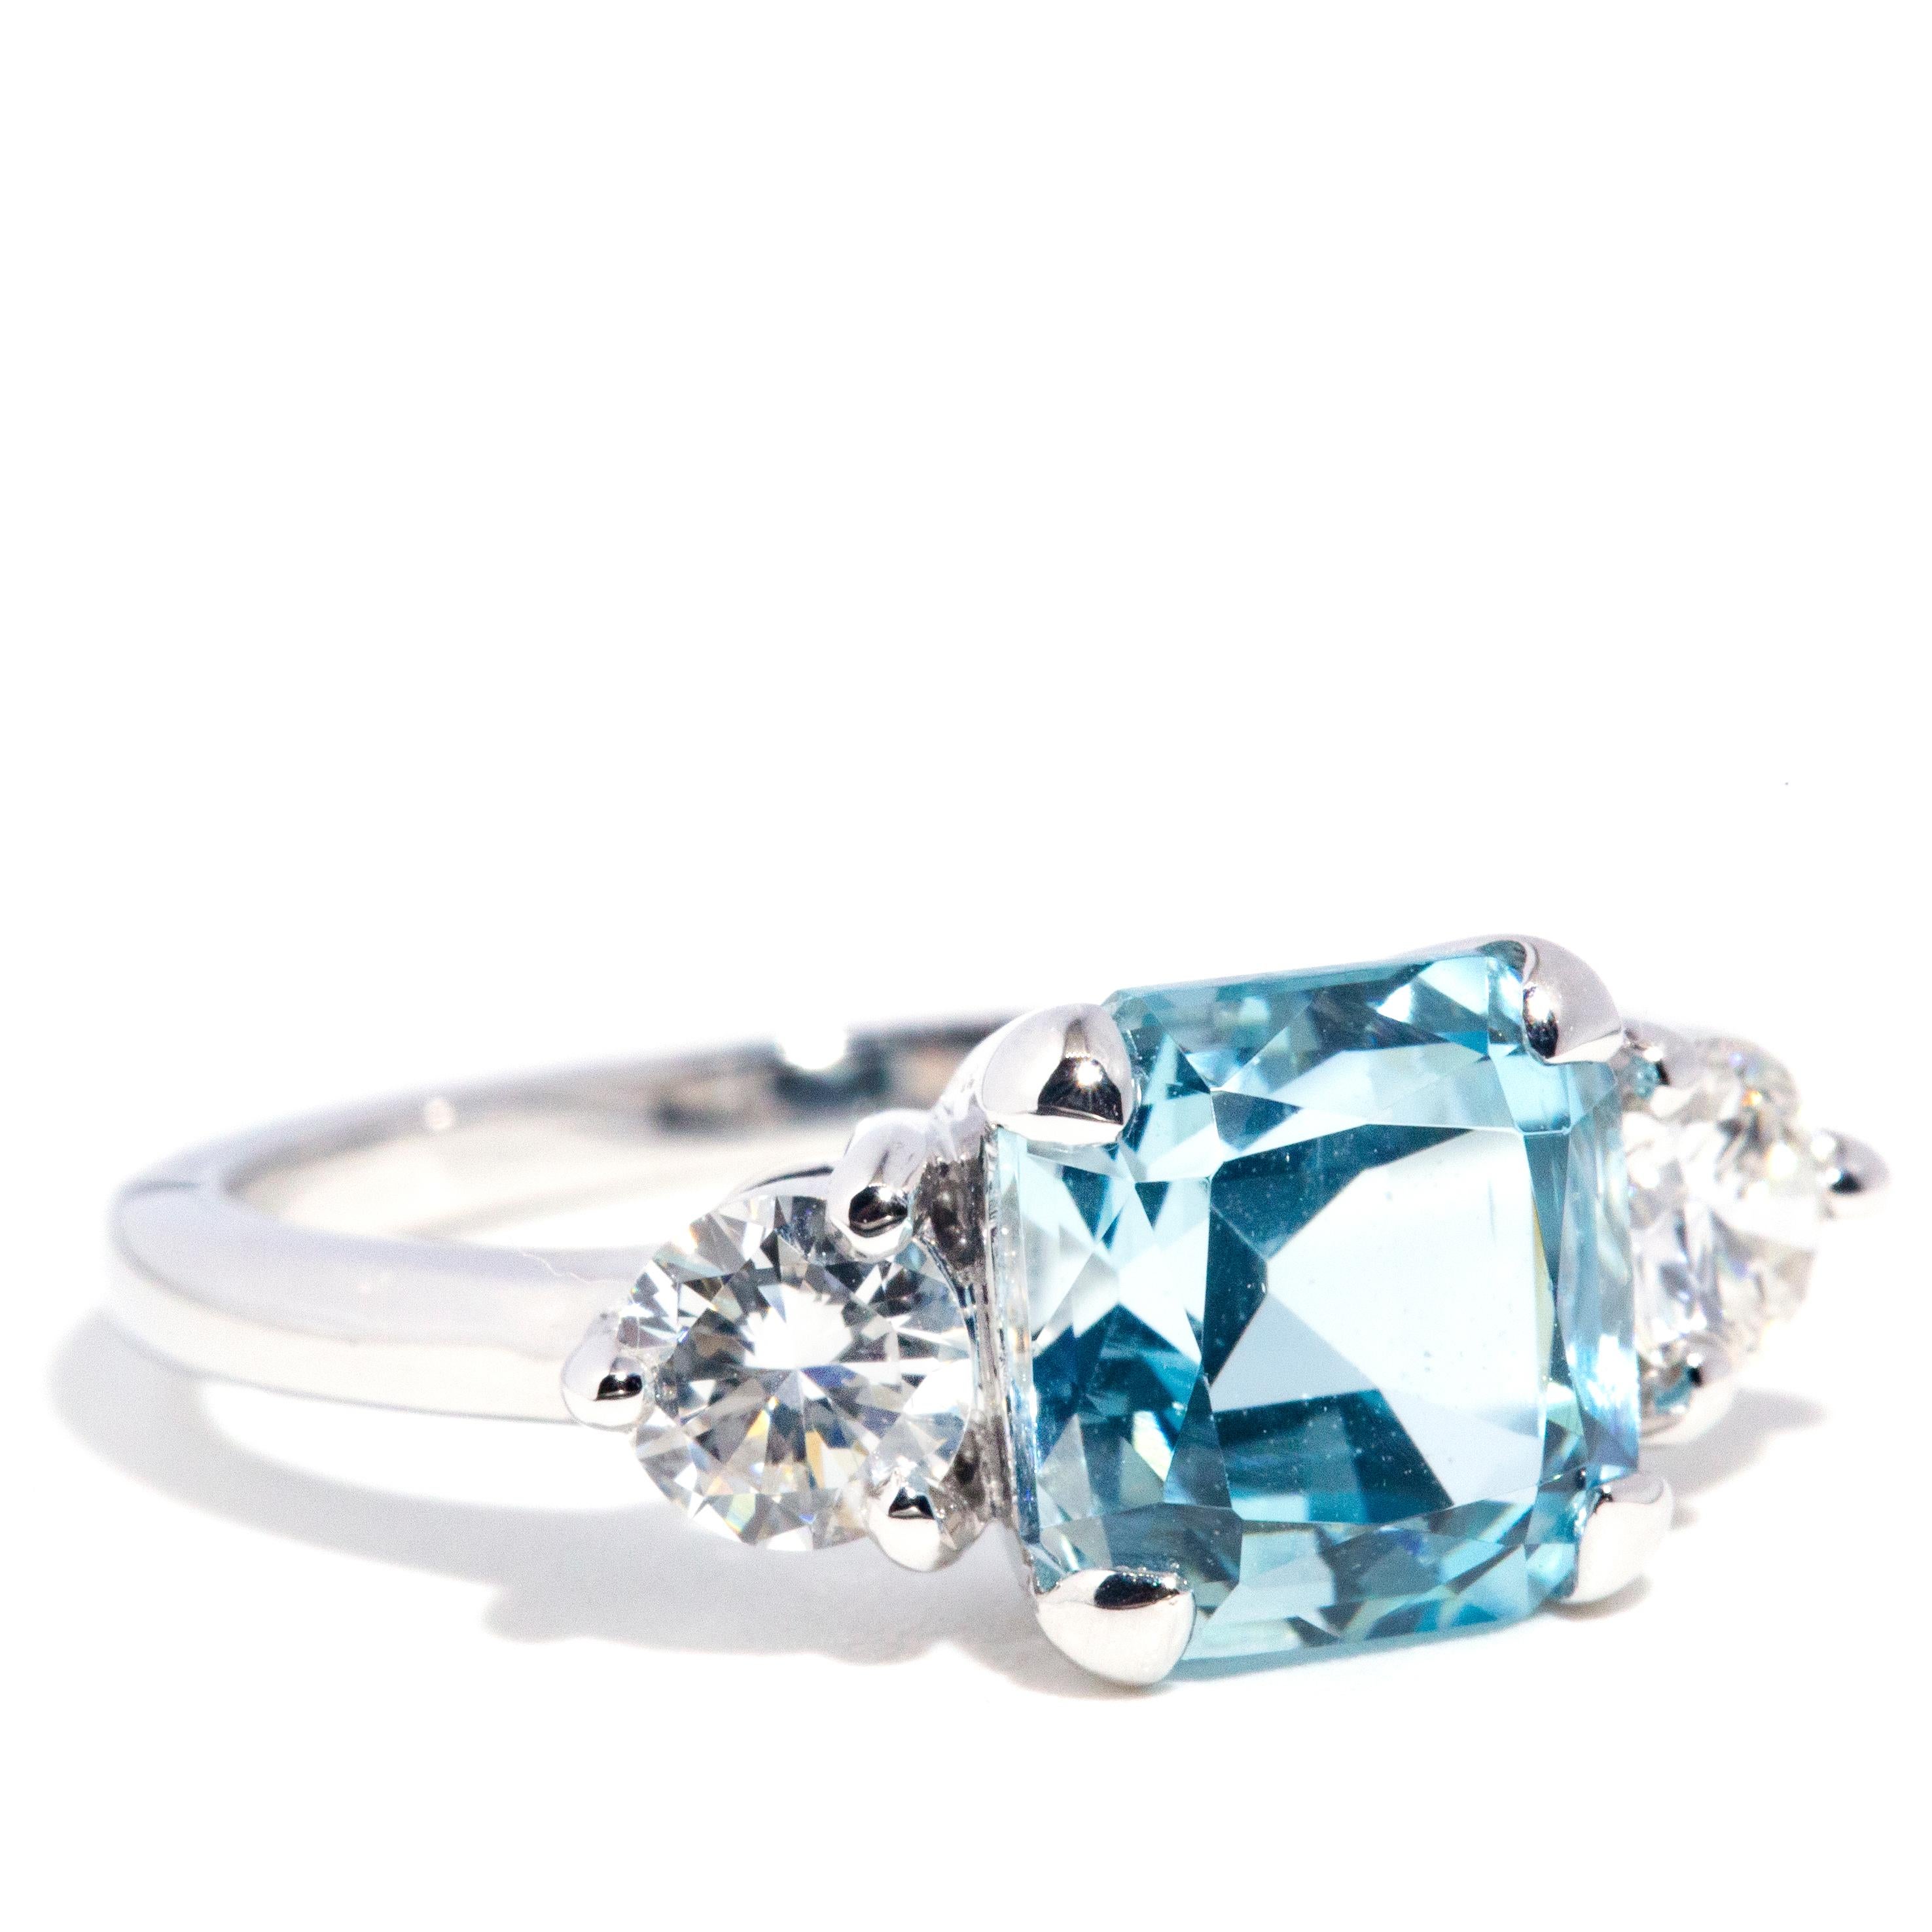 Exquisitely crafted in 18 carat white gold, this gorgeous three stone ring is a captivating show of light with a spectacular 2.42 carat bright blue aquamarine carefully set between a stunning 0.58 carats of certified round brilliant cut diamonds. We